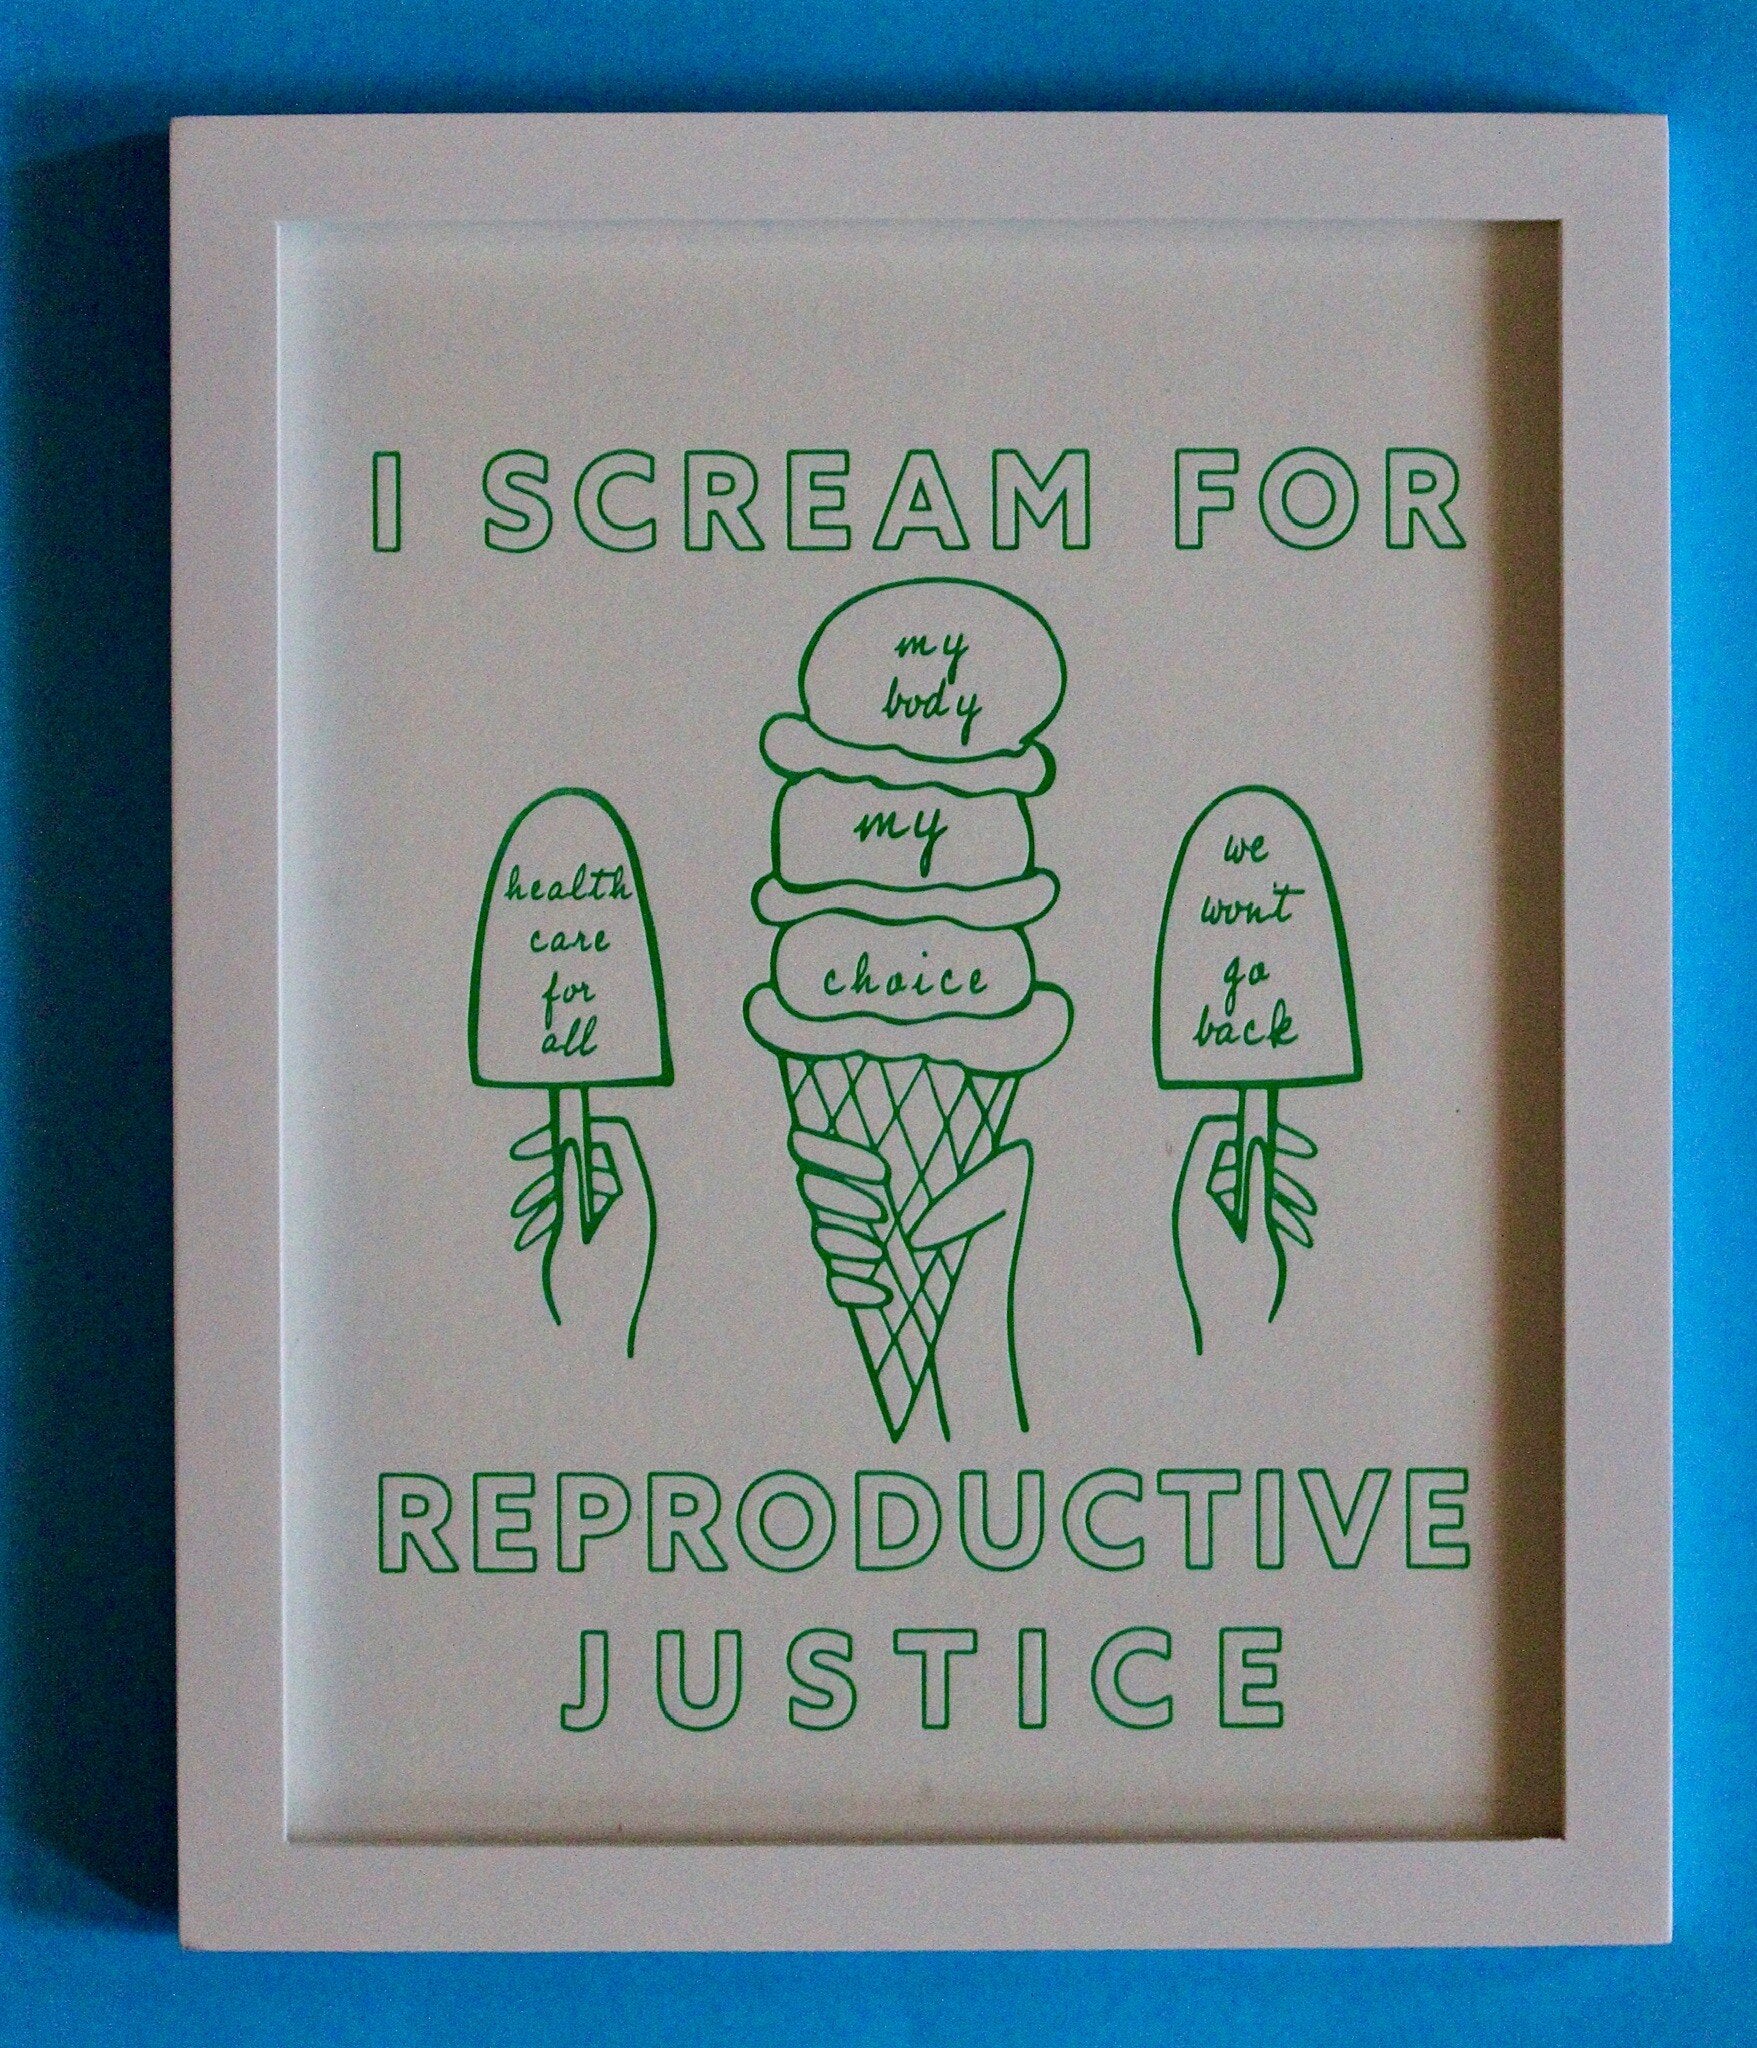 A framed print that reads "I Scream for Reproductive Justice" in mint green letters with ice cream illustrations on a blue wall